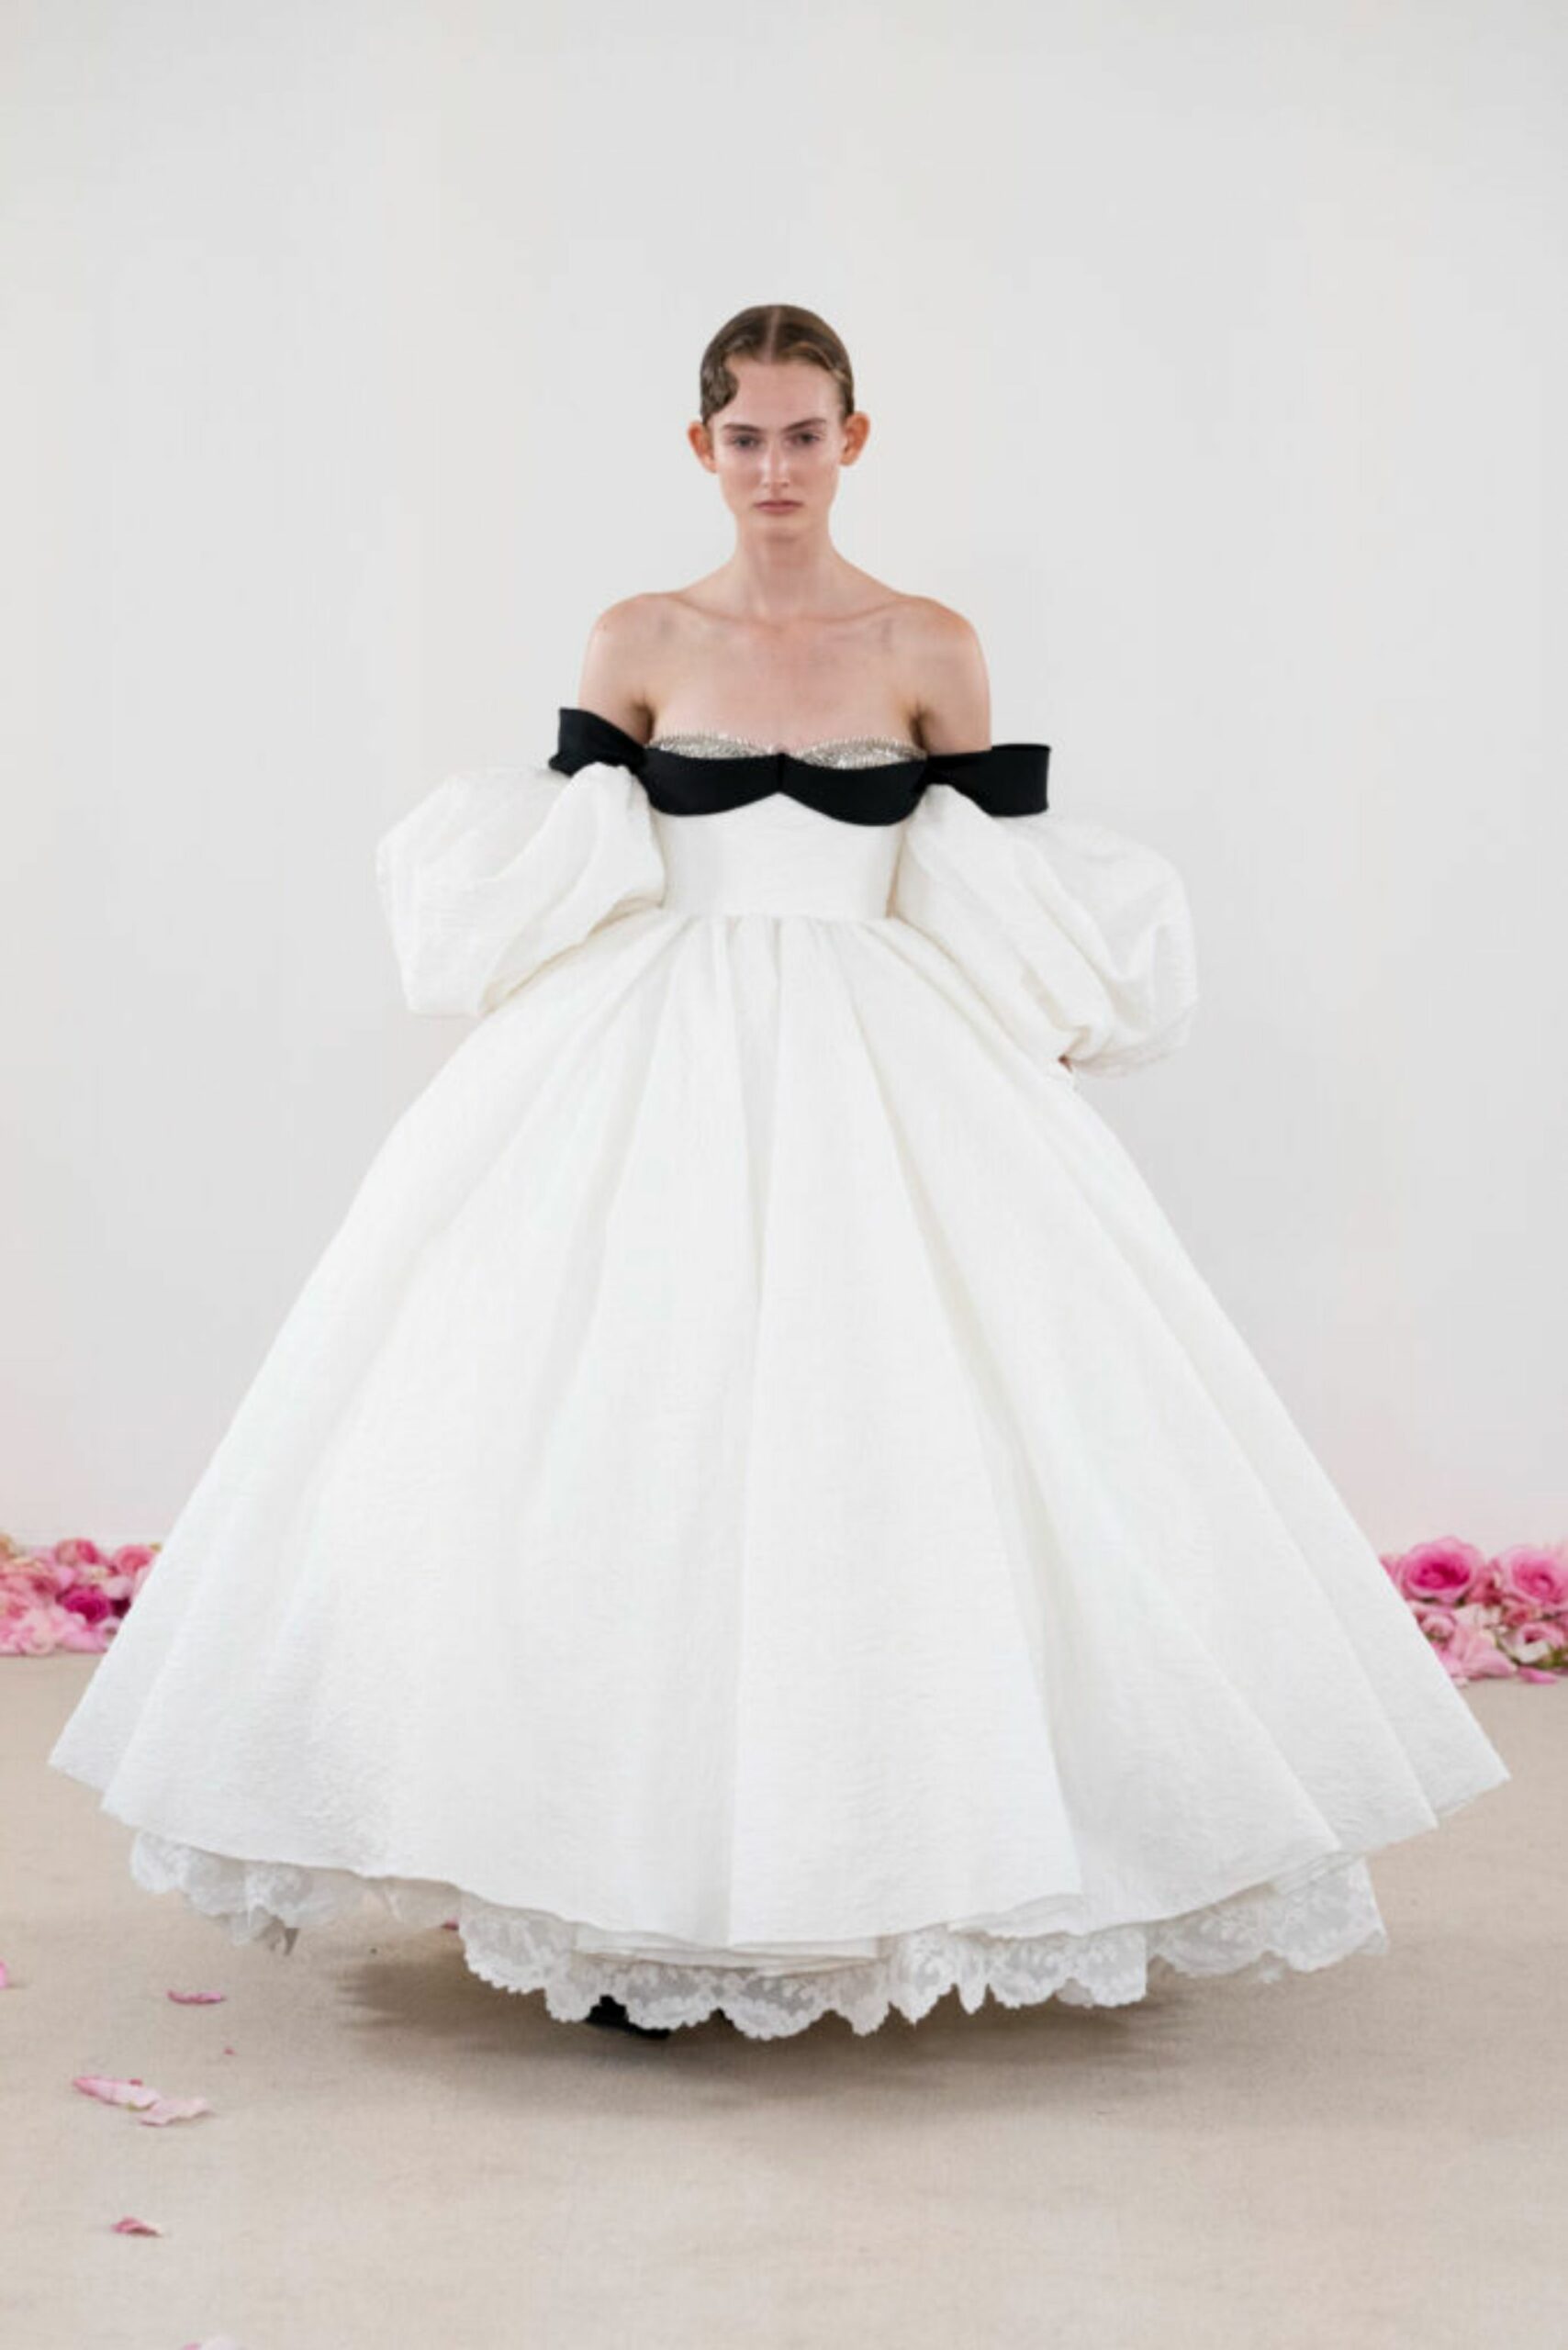 An all-white gown with black and bedazzled accents from the new Giambattista Valli Haute Couture 25 collection.